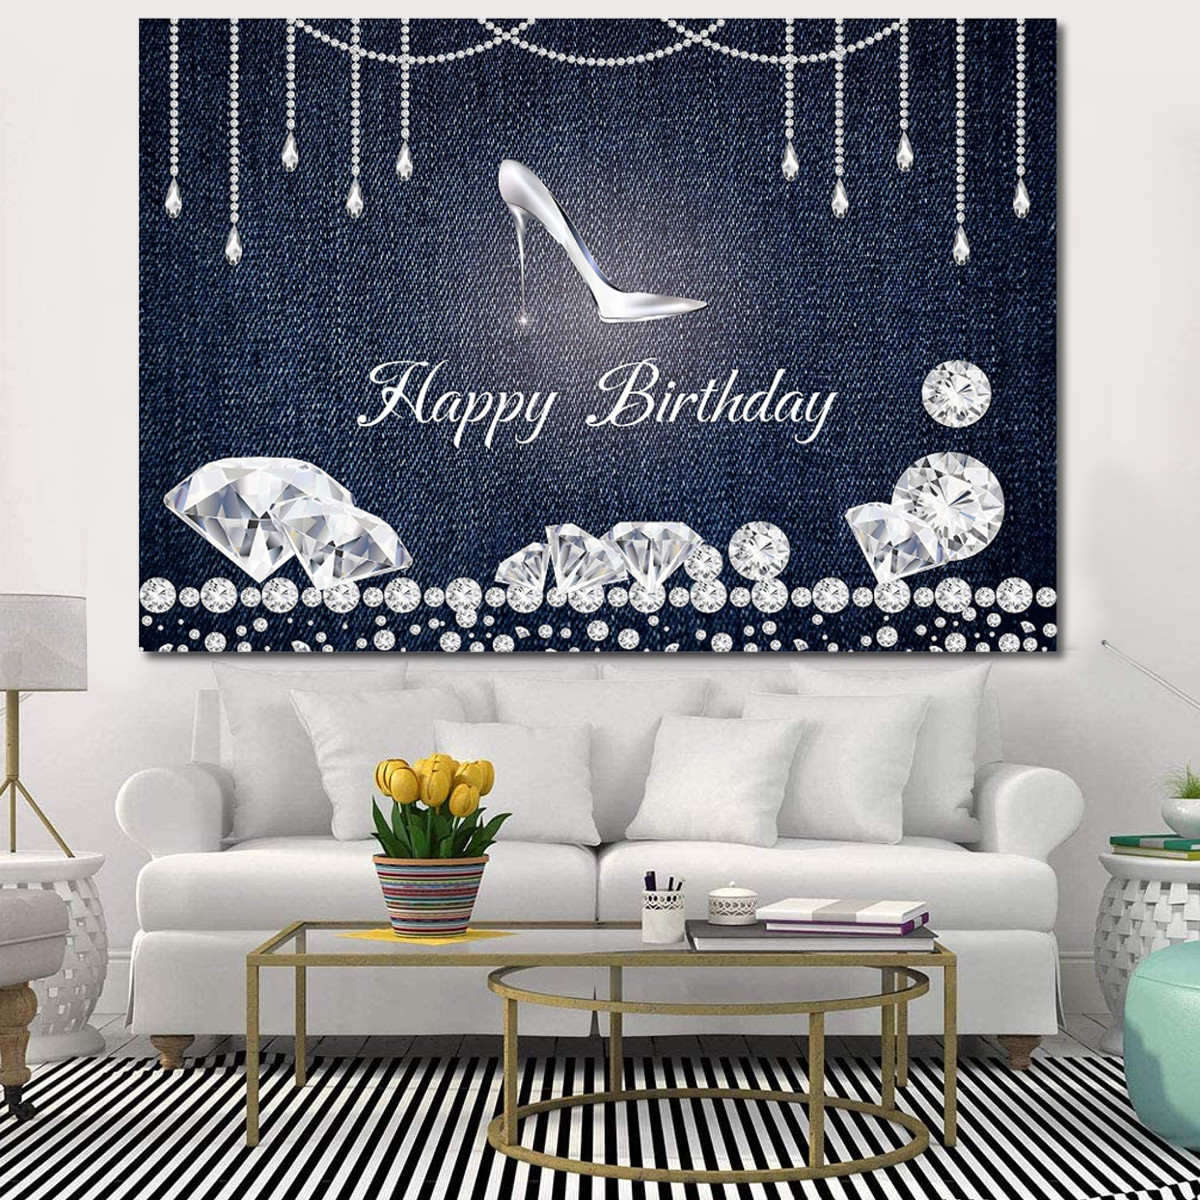 Happy-Birthday-Photography-Backdrop-Photo-Background-Studio-Home-Party-Decor-Props-1821552-4